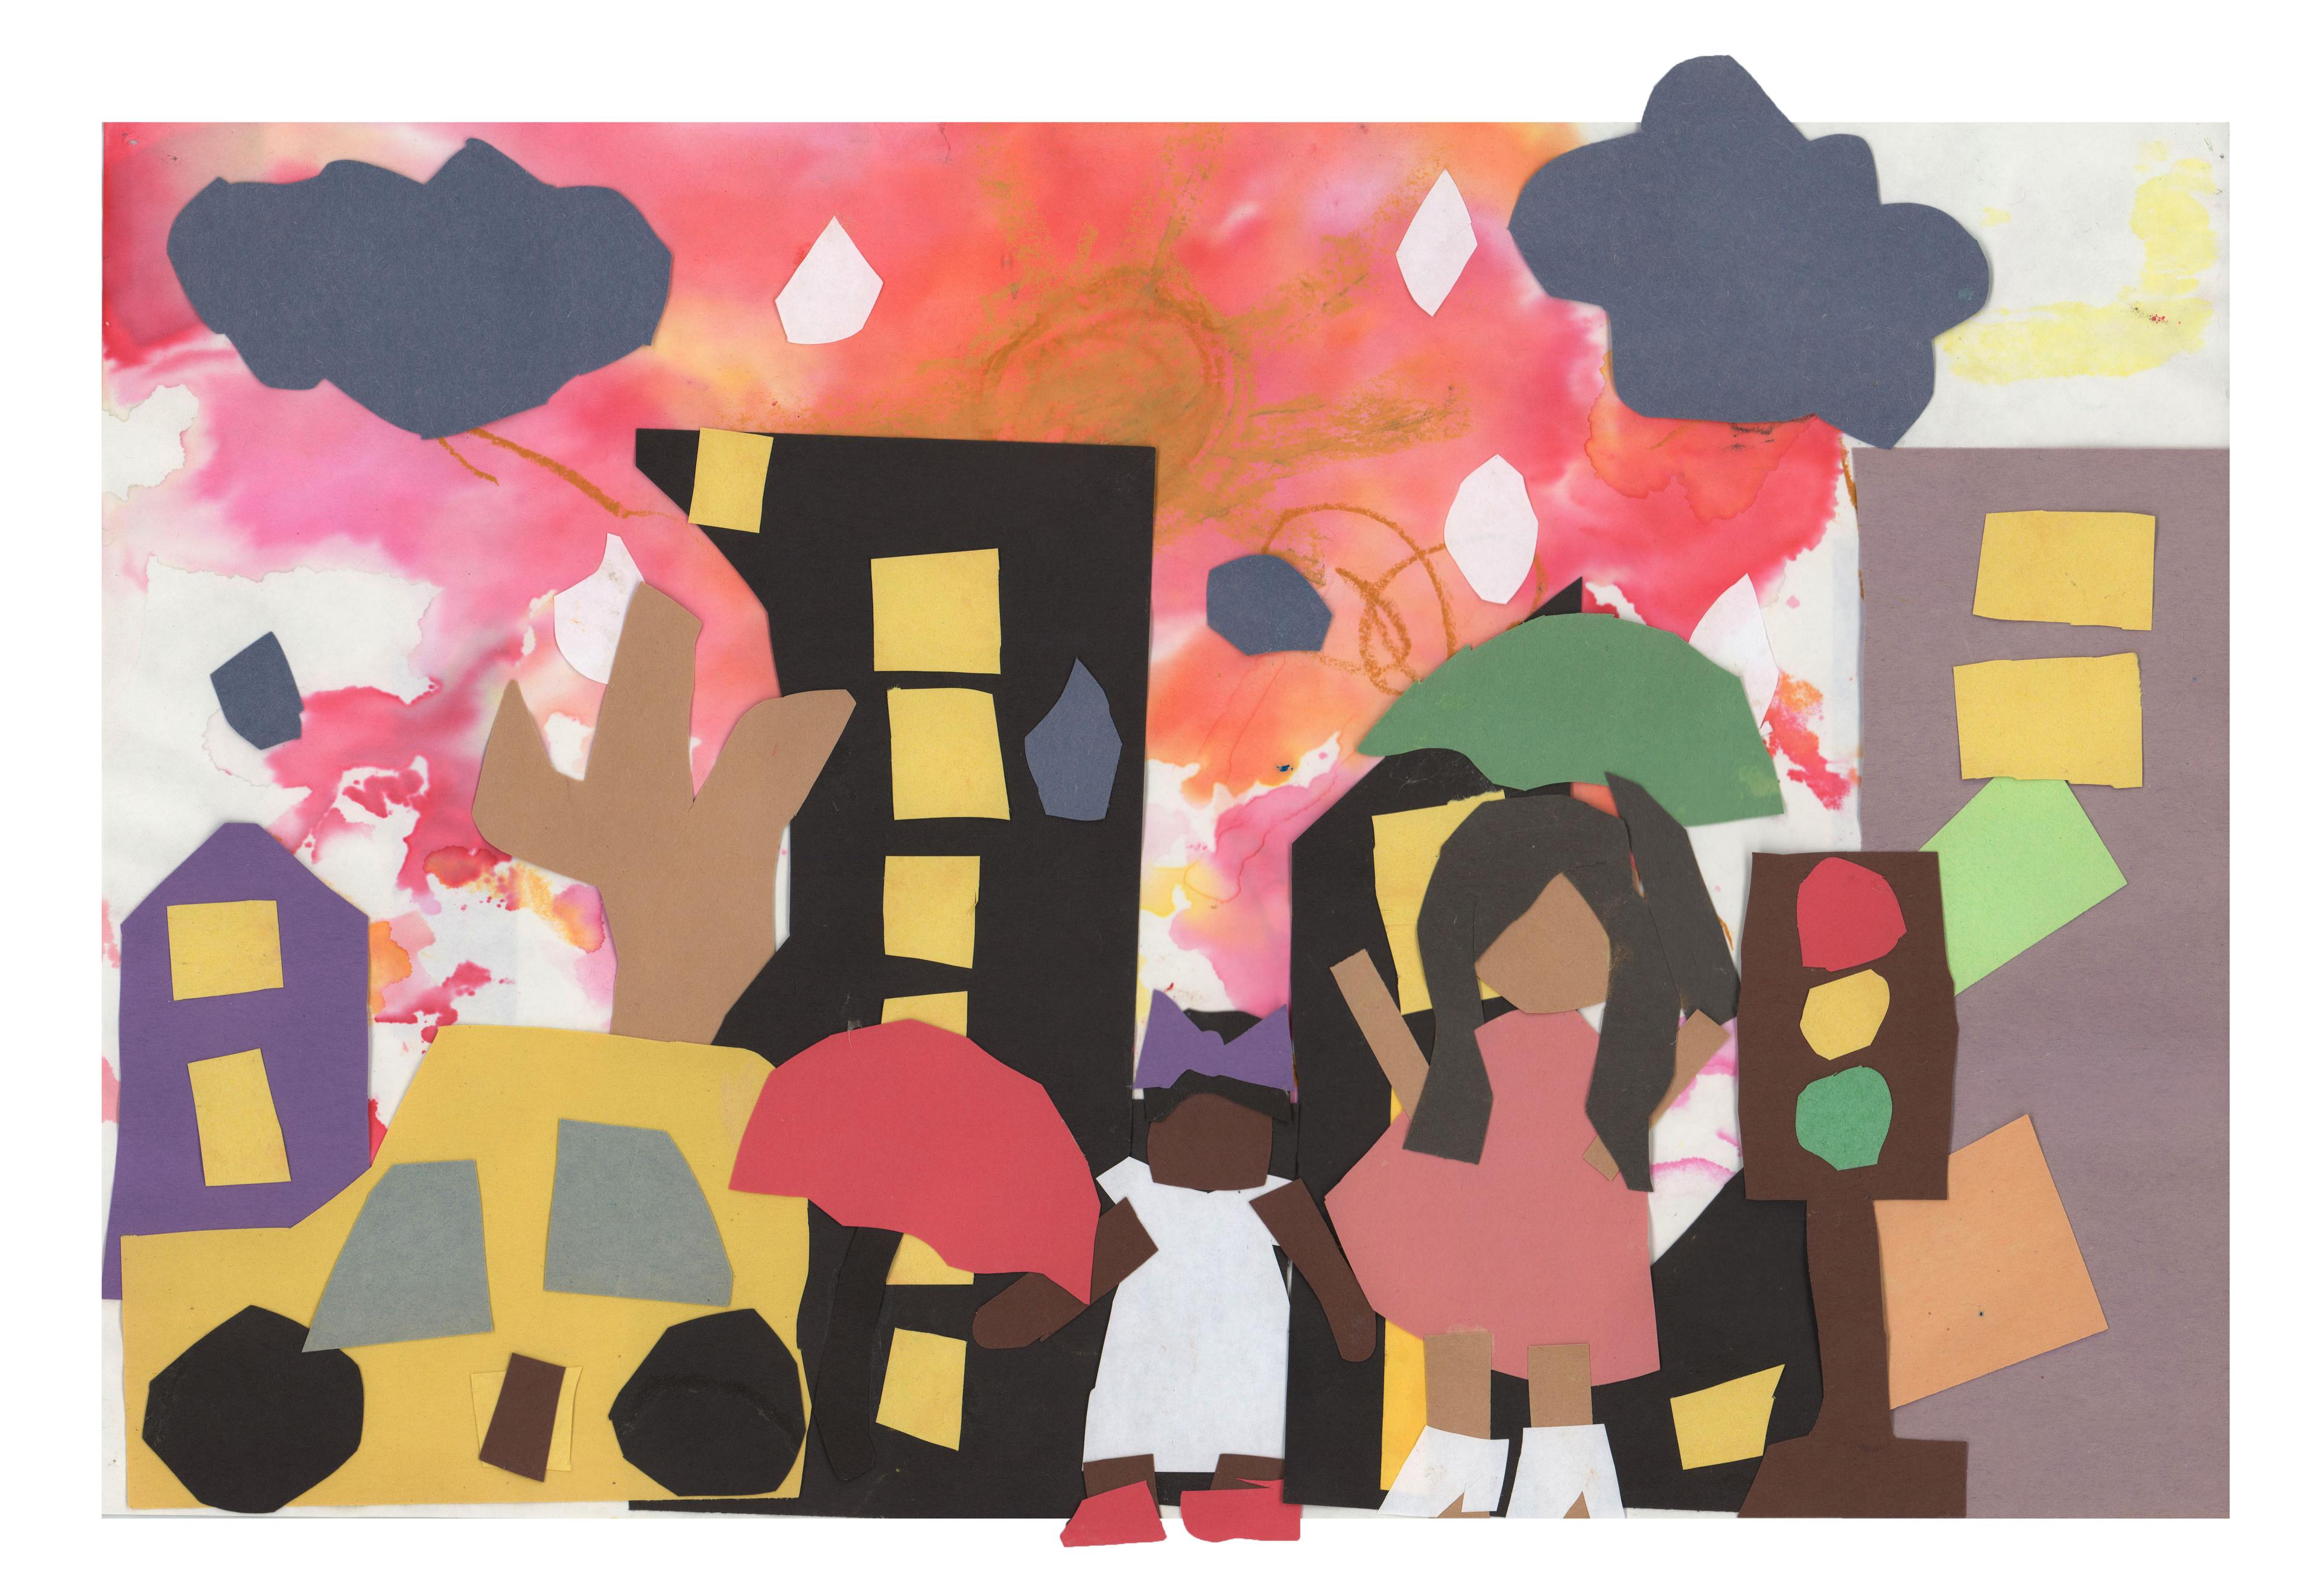 Mixed-media collage of a small girl in a white dress standing and holding a red umbrella. To the right stands an adult woman in a pink dress, holding a green umbrella over her head. A yellow car drives to the left, away from the girl. A red, yellow, and green traffic light pole stands to the right of the woman. Purple, black, and gray tall buildings with yellow windows rise in the background beneath a red sky with dark gray clouds and large white falling raindrops.